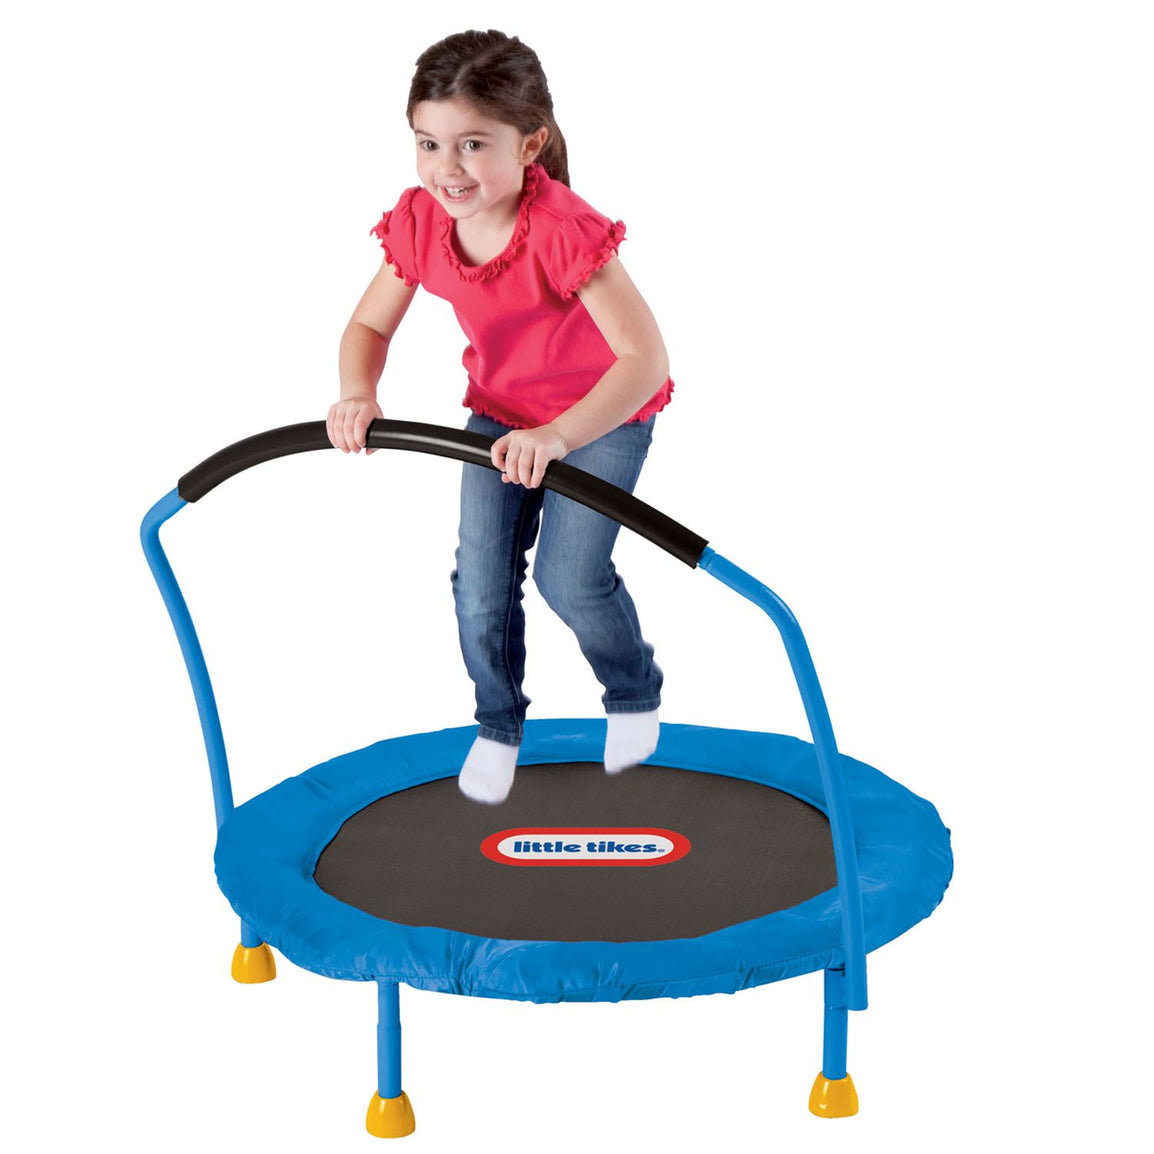 Little Tikes® 3 - Foot Trampoline at Little Tikes – Official Little Tikes